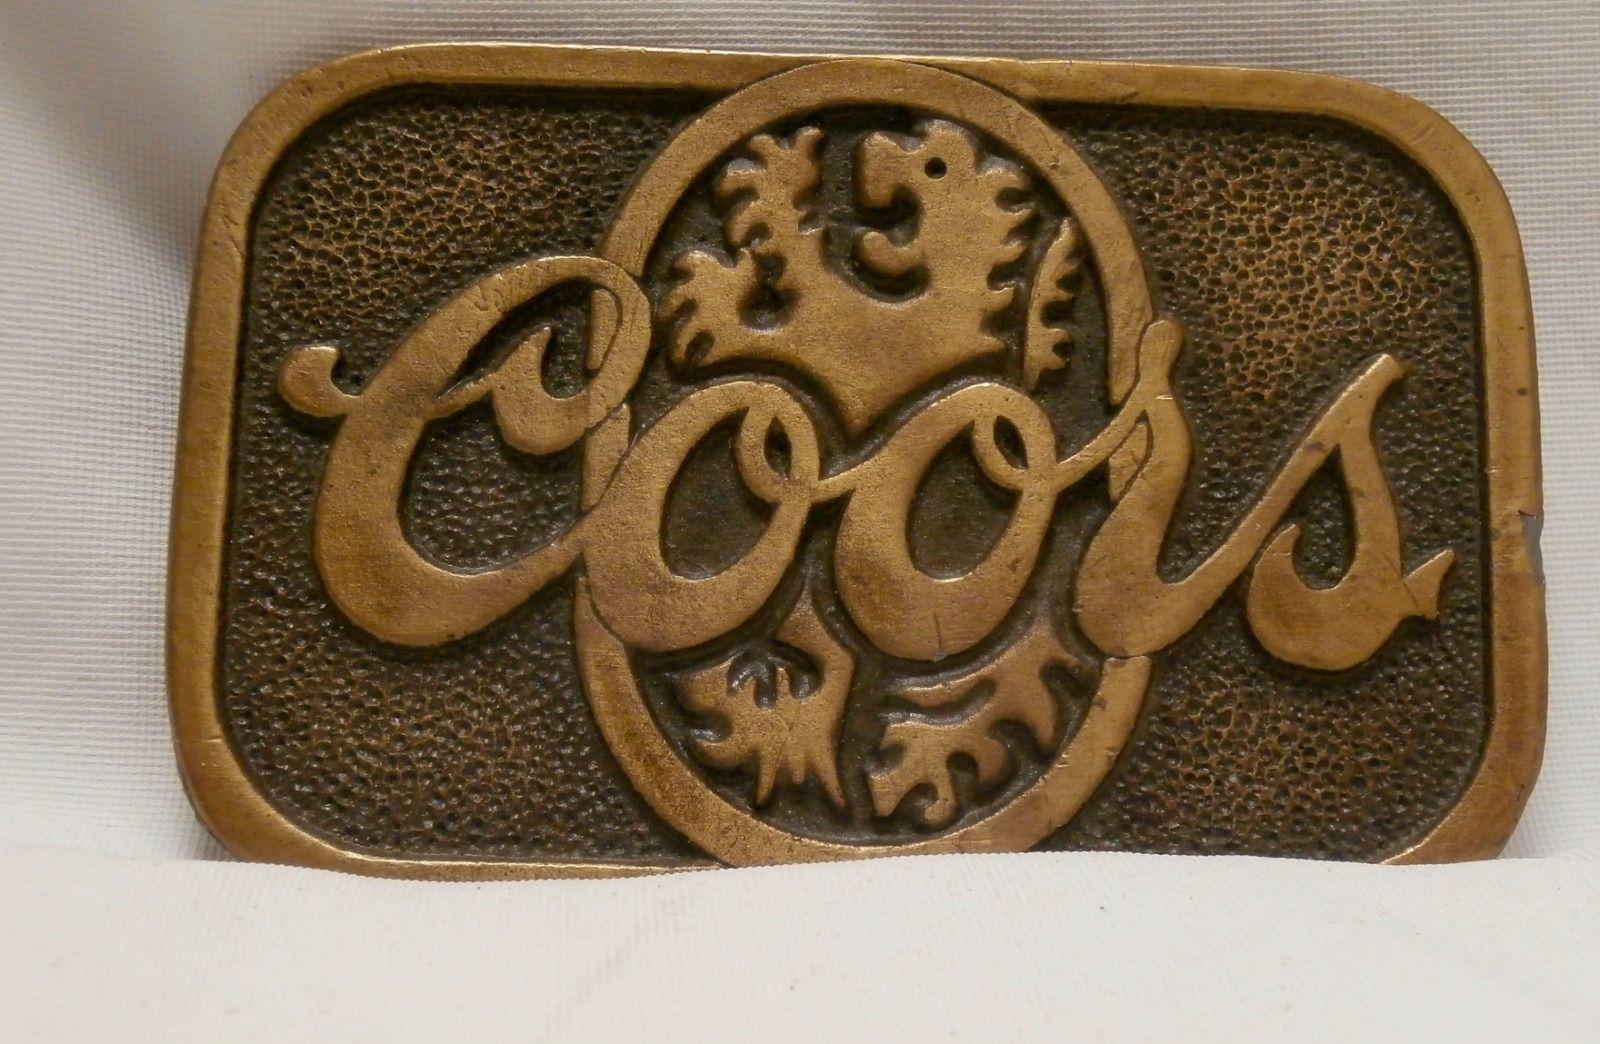 Coors Lion Logo - Vintage Coors Brewing Co Beer with Lion Logo Solid Metal Belt Buckle